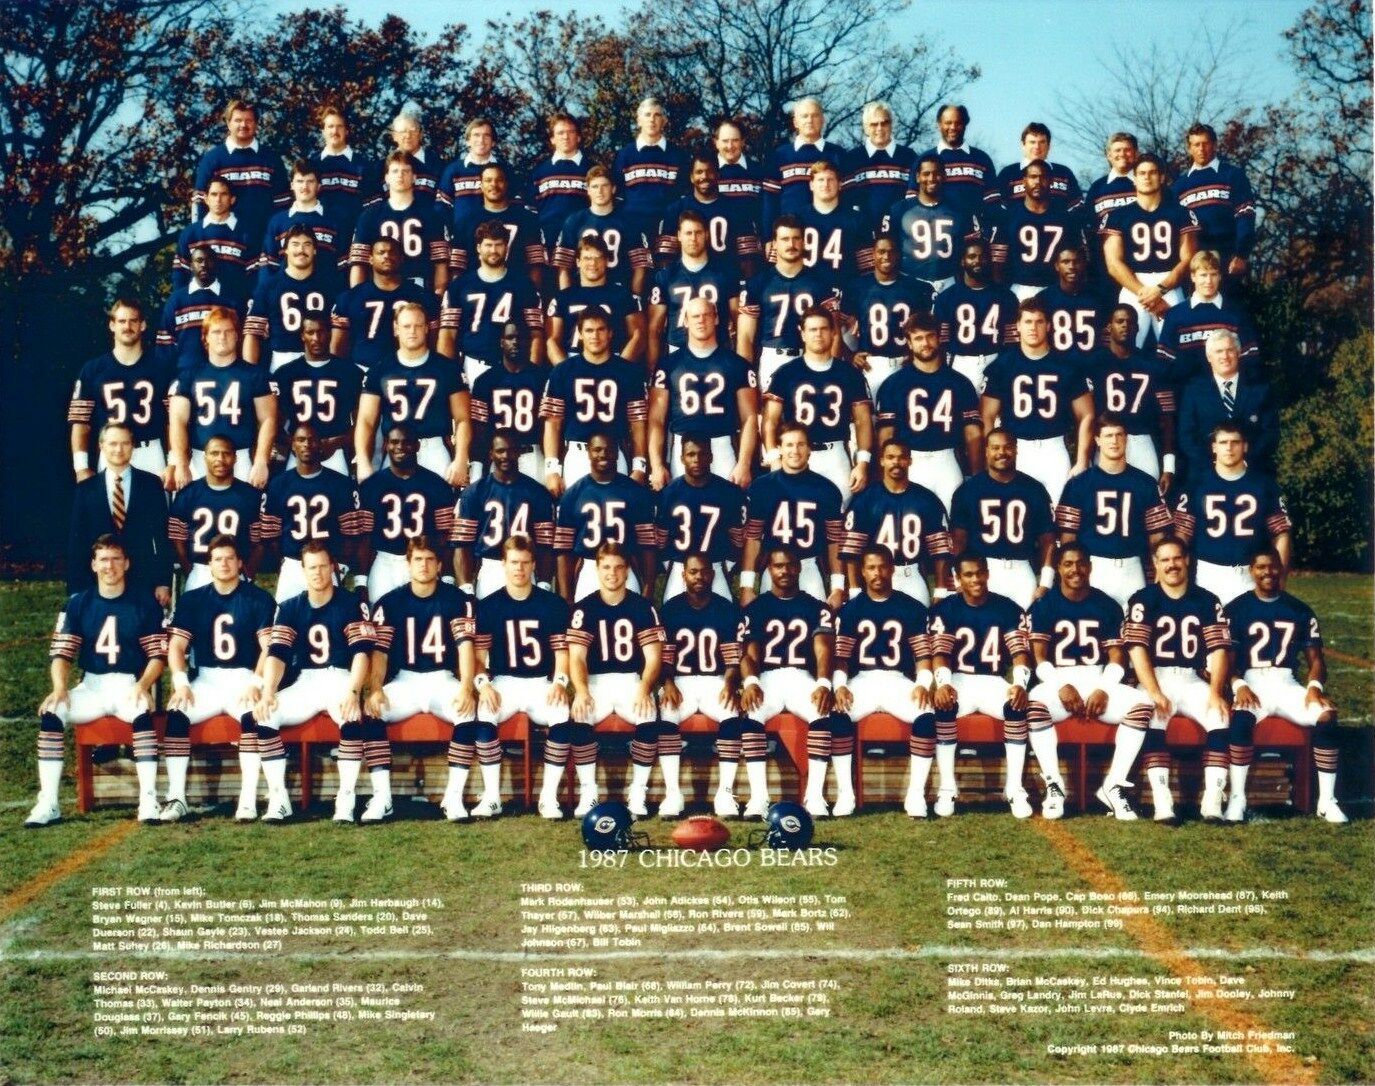 1987 CHICAGO BEARS 8X10 TEAM PHOTO FOOTBALL NFL PICTURE - $4.94